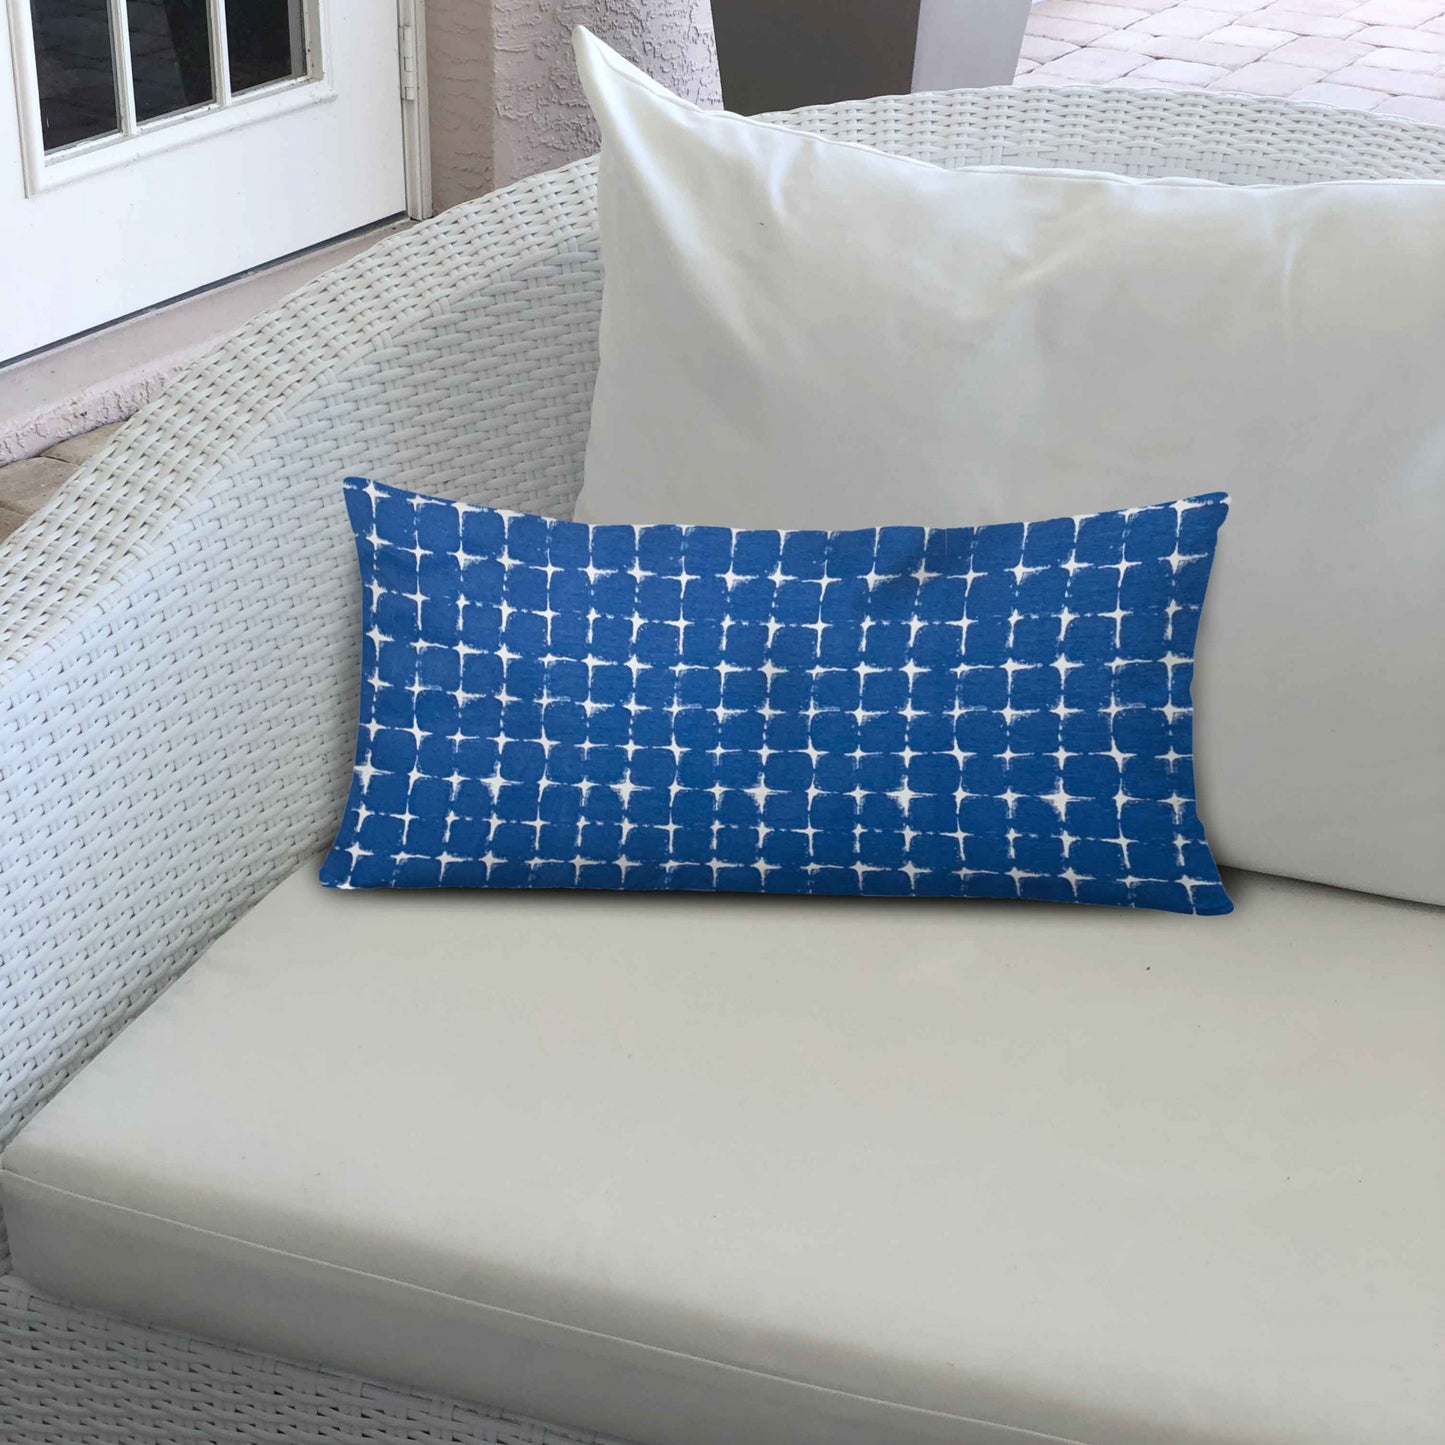 20" X 20" Blue And White Zippered Gingham Throw Indoor Outdoor Pillow Cover